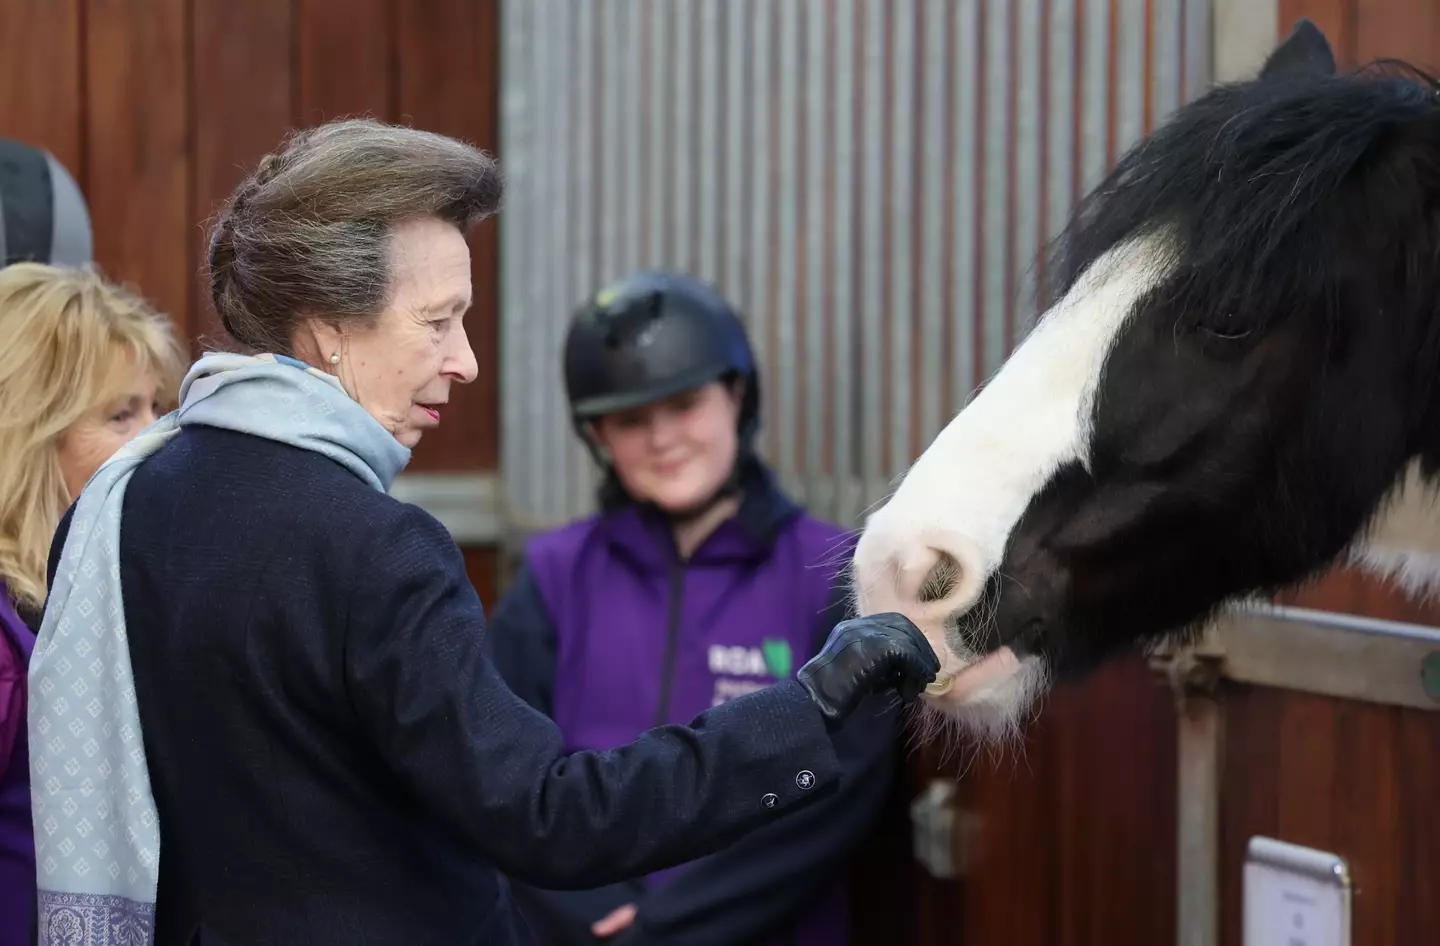 The Princess Royal is a keen equestrian. (Chris Jackson/Getty Images)